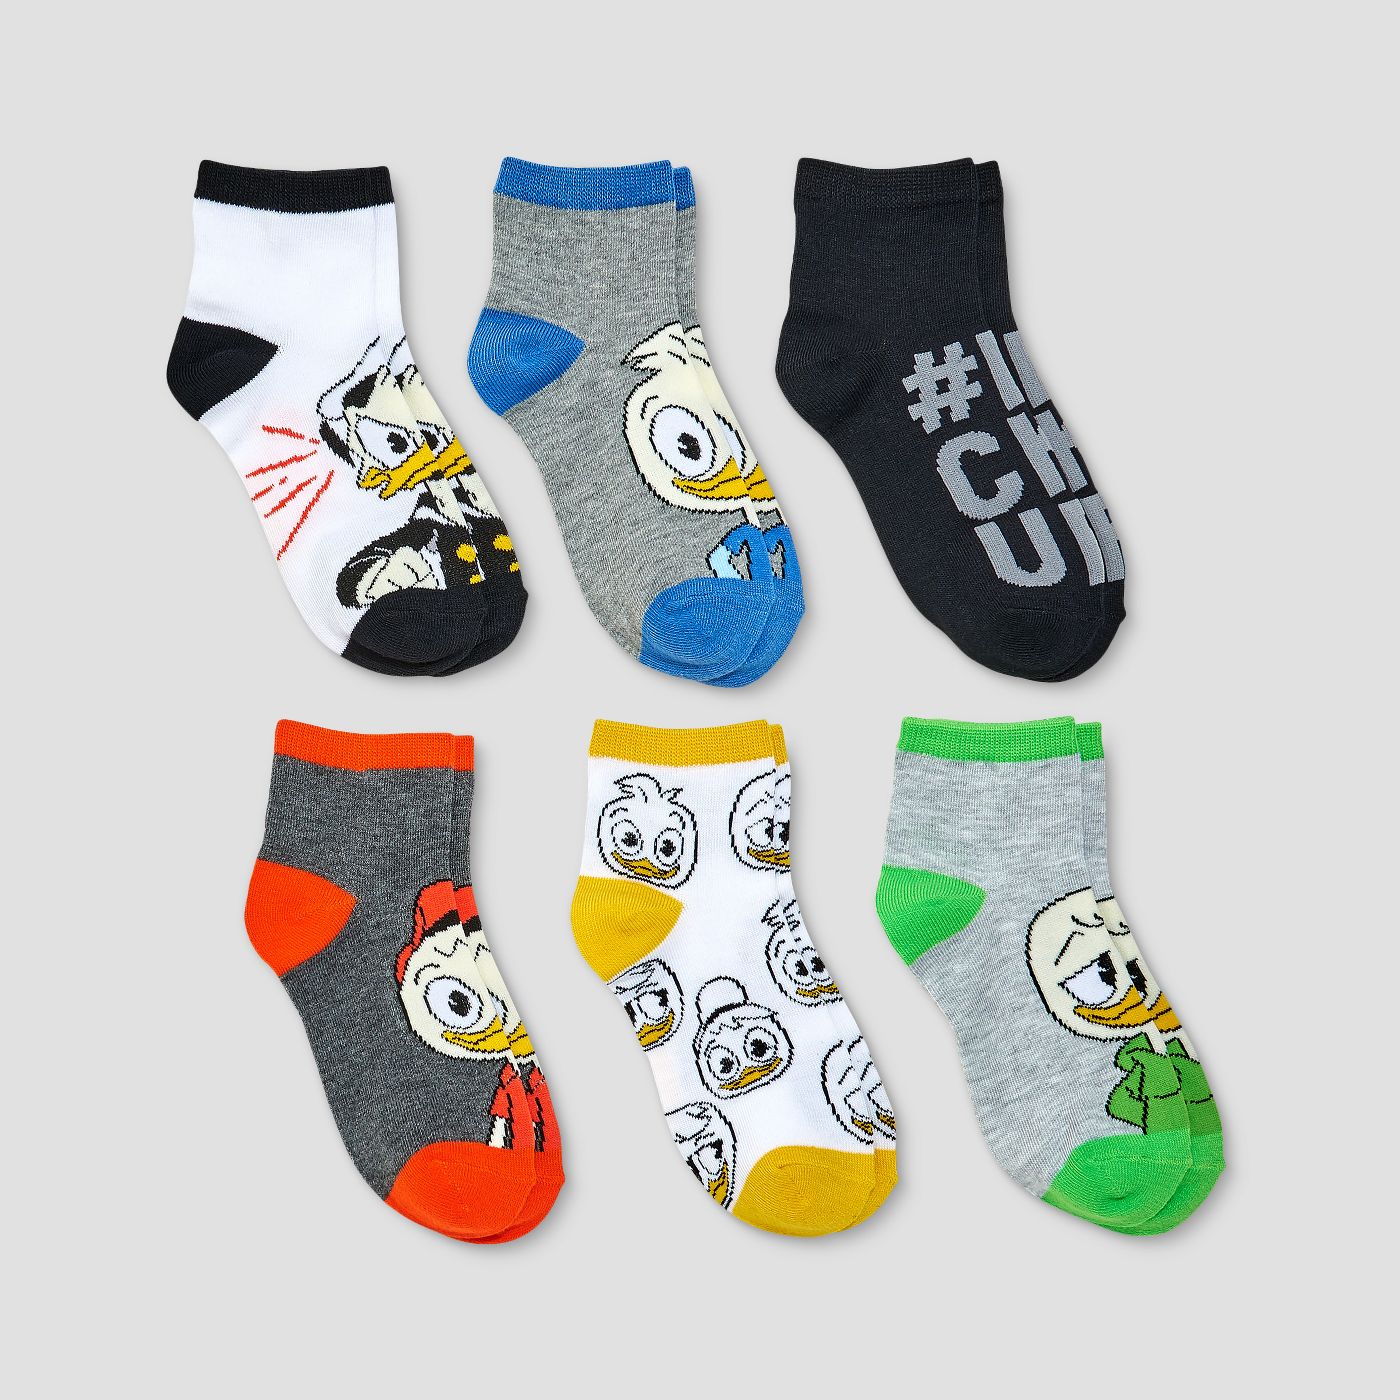 Disney DuckTales Ankle Socks 6 Pairs Size S/M 9-2 1/2 New with Tags